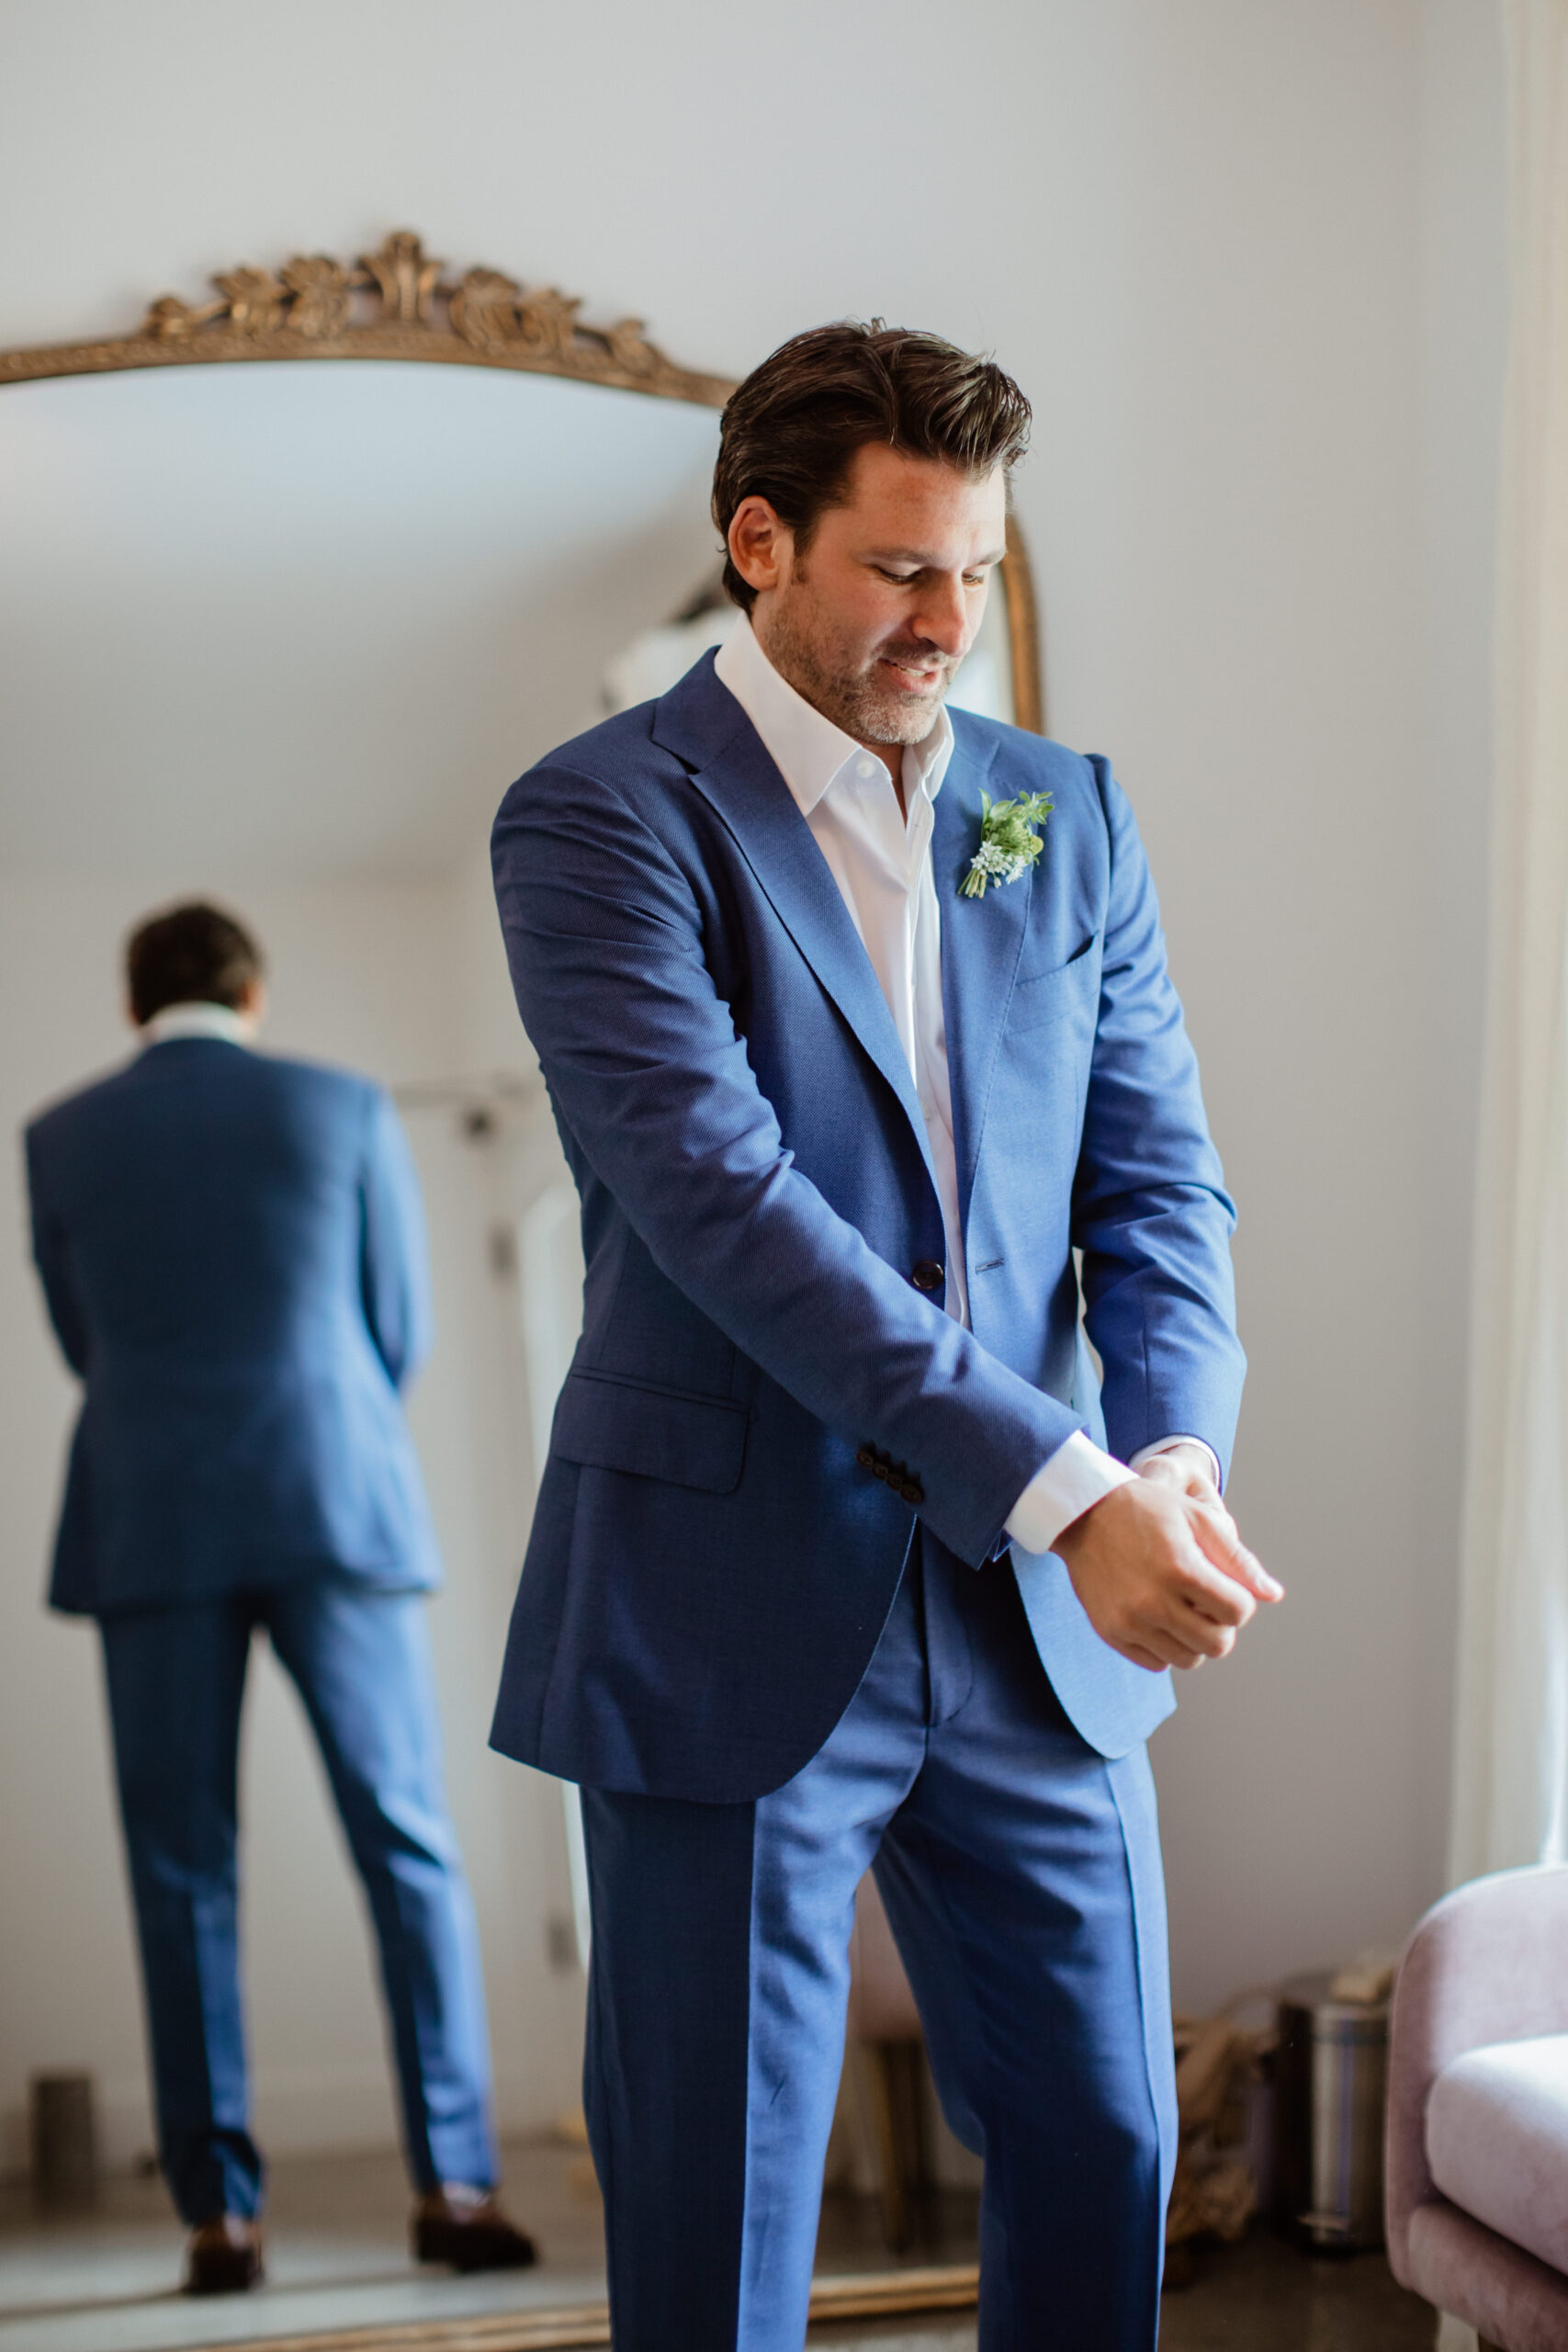 Handsome groom prepares for his dreamy upstate New York wedding day